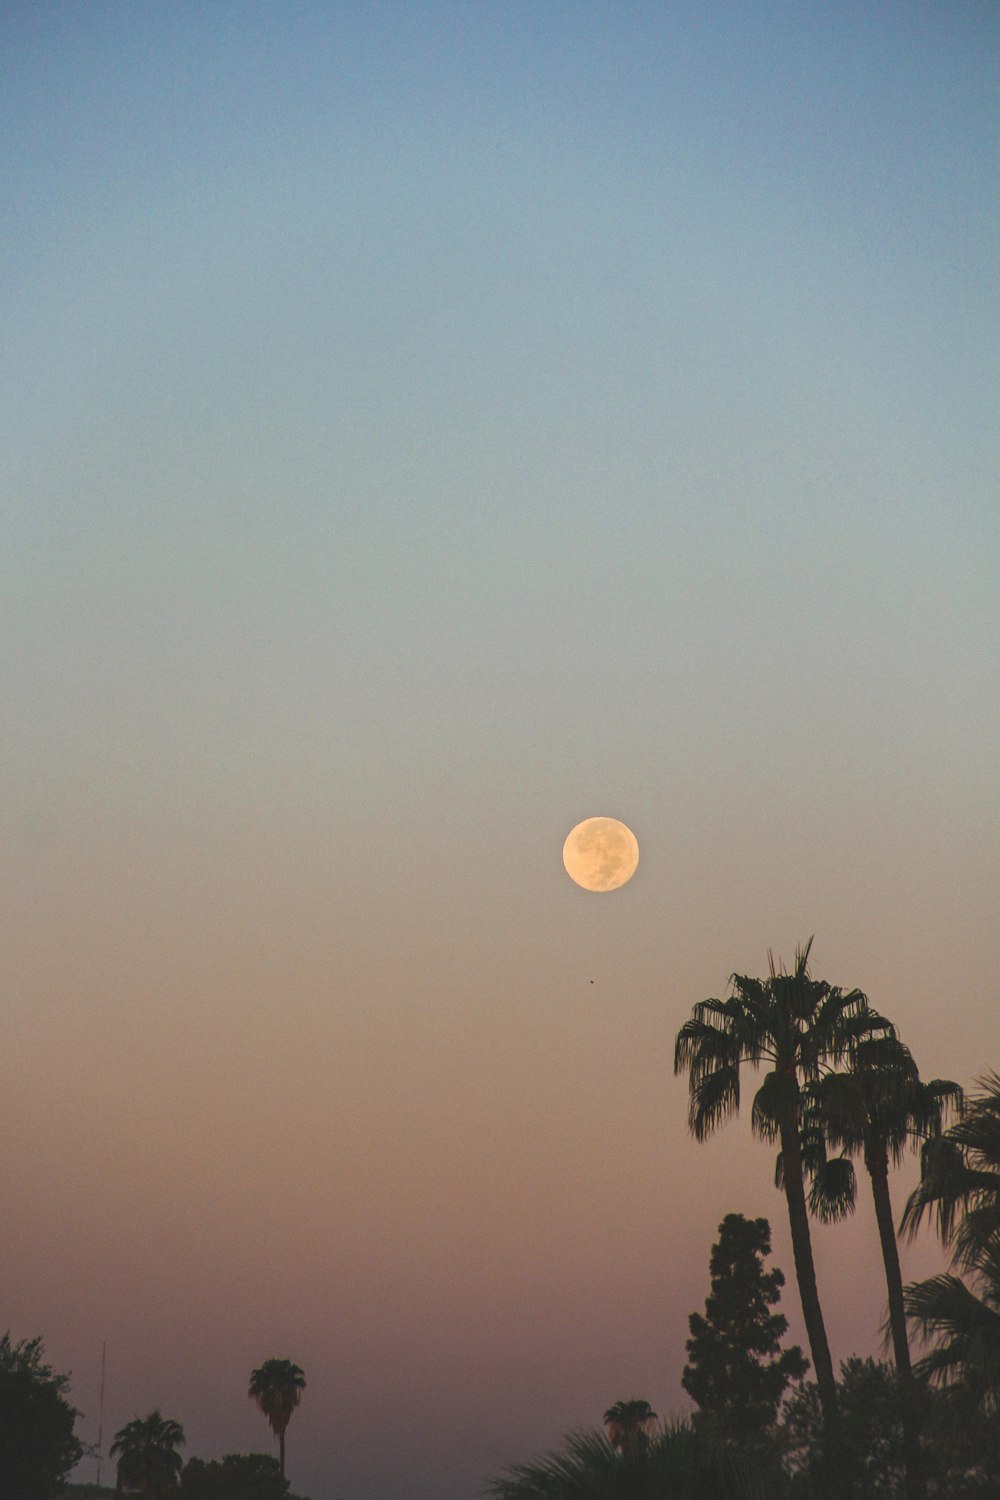 a full moon is seen in the sky above palm trees